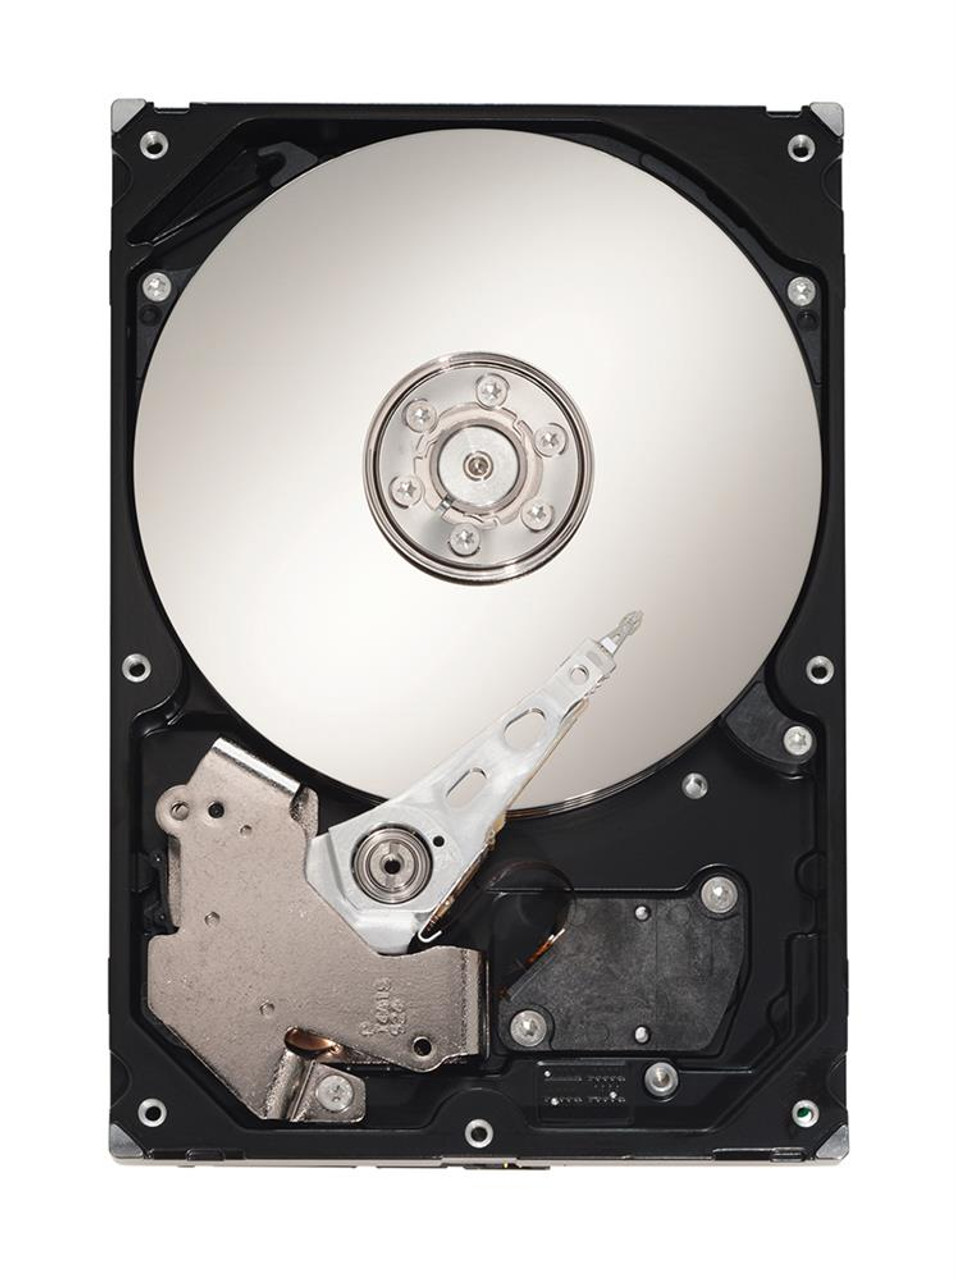 50YJW Dell 3TB 7200RPM SATA 3Gbps 3.5-inch Internal Hard Drive with Tray for PowerEdge Servers